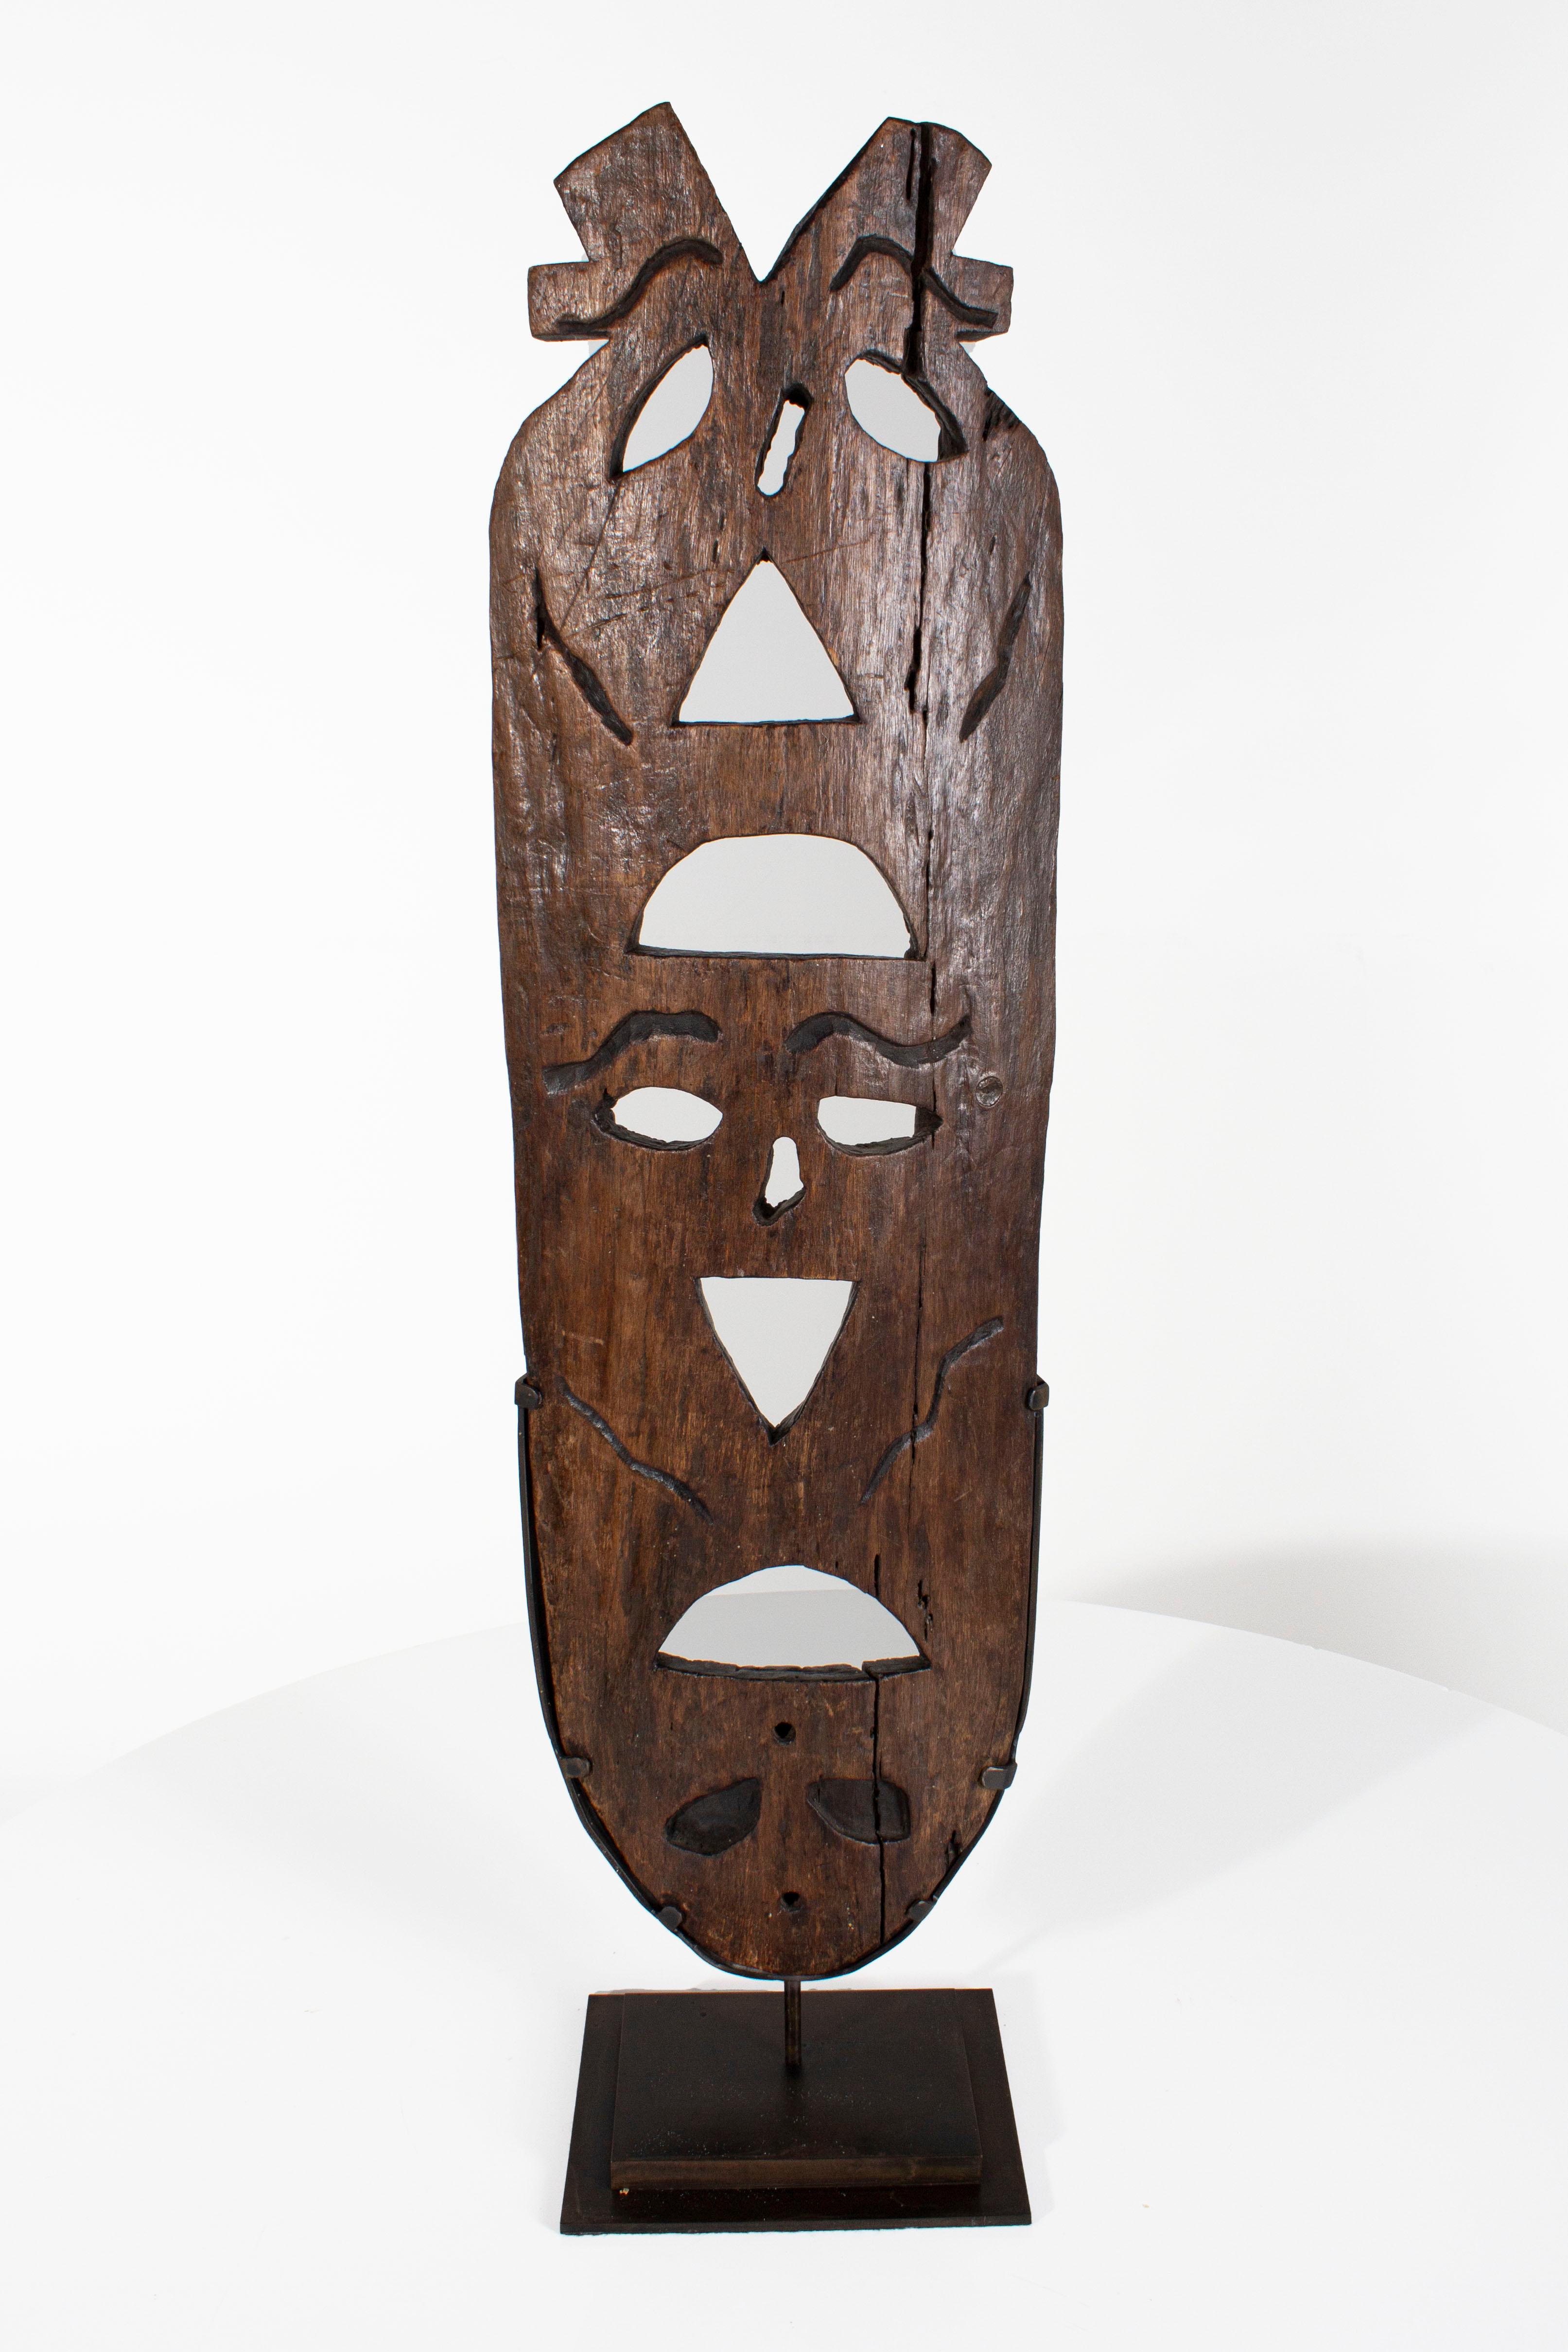 African vintage wood carving. In my organic, contemporary, vintage and mid-century modern aesthetic.

   